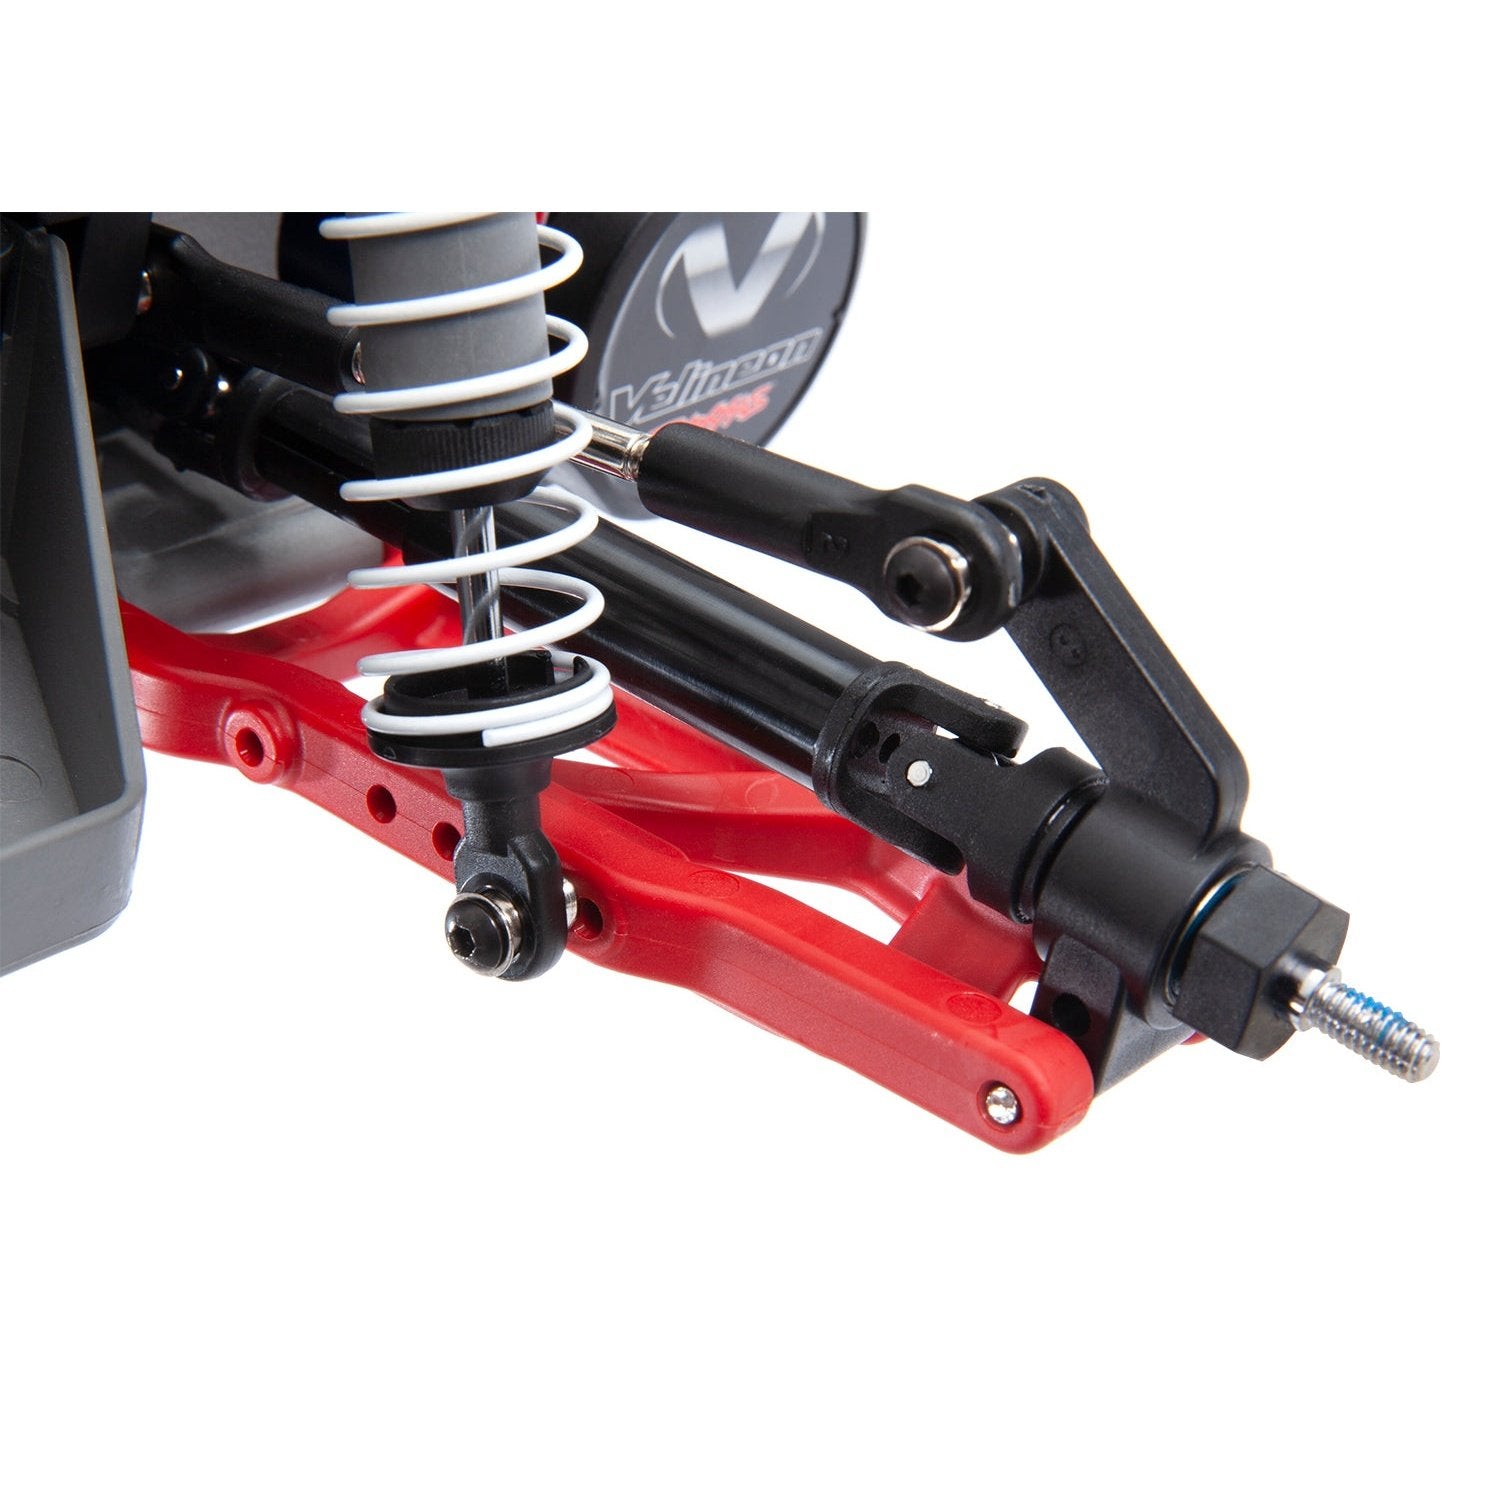 Traxxas Heavy-duty suspension arms for Stampede, Rustler RC Trucks, and more.